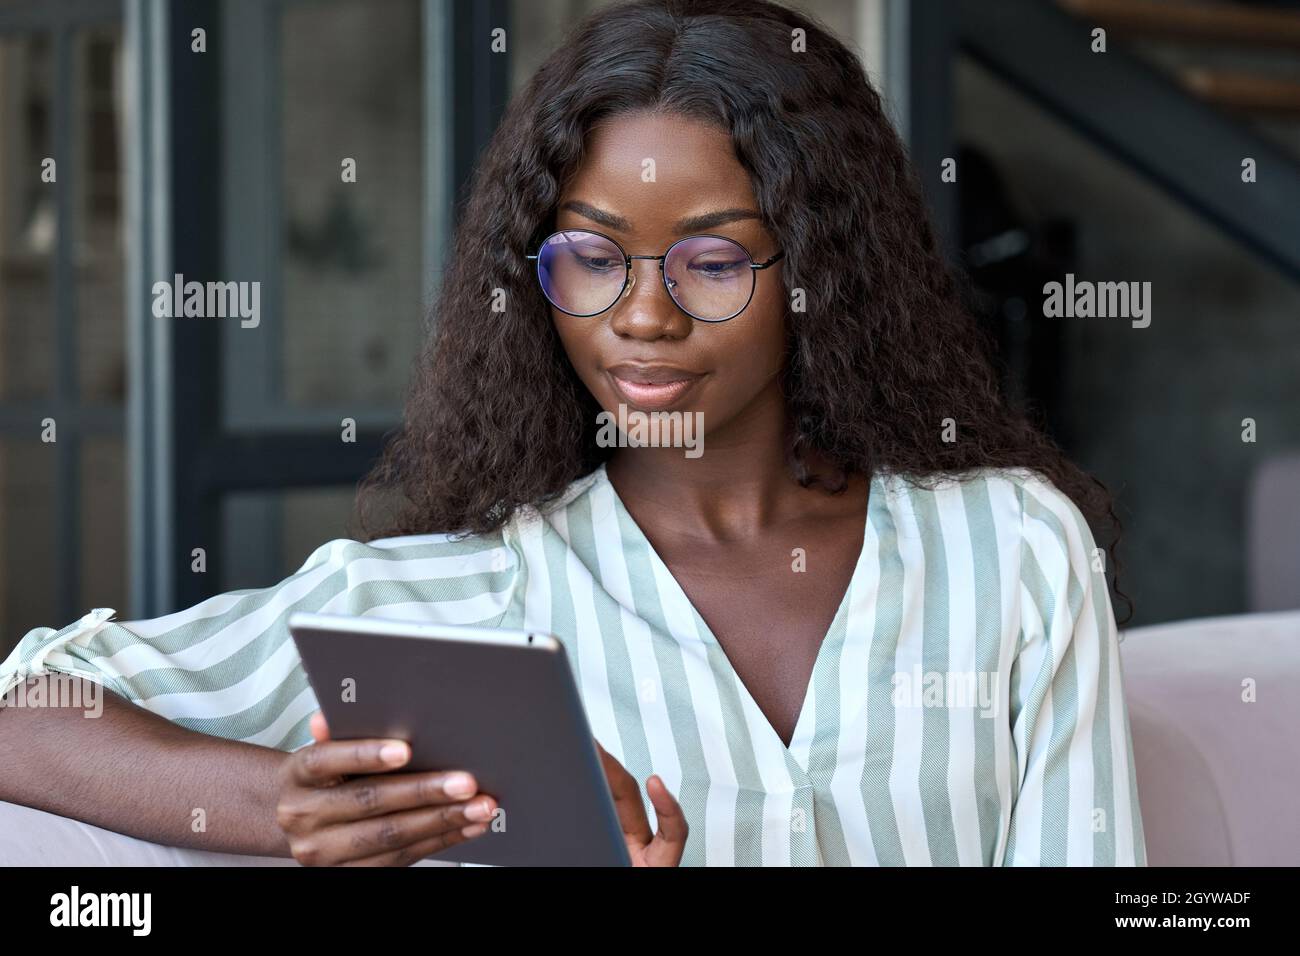 Young black African woman holding using digital tablet sitting on couch at home. Stock Photo